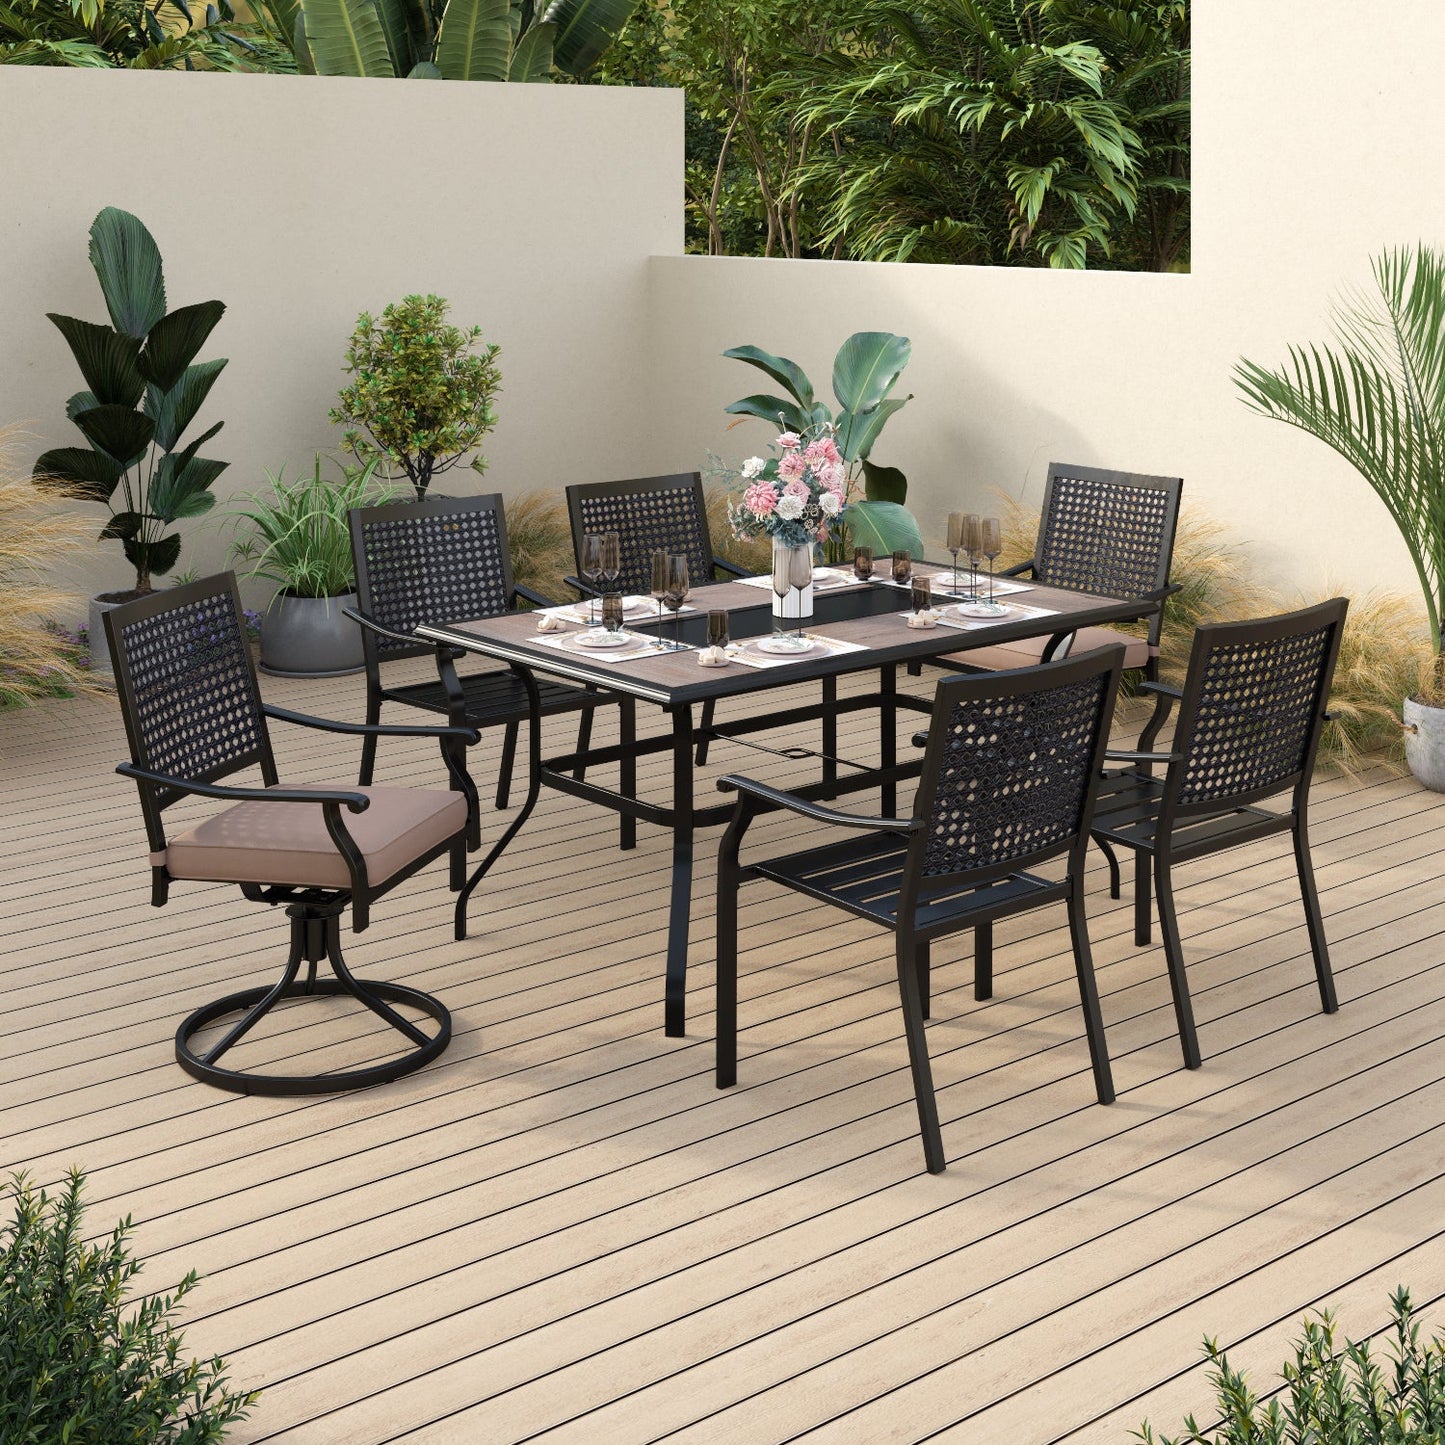 Sophia & William 7 Piece Outdoor Patio Dining Set 1 Retangular Table and 5 Metal Chairs&1 Swivel Dining Chair